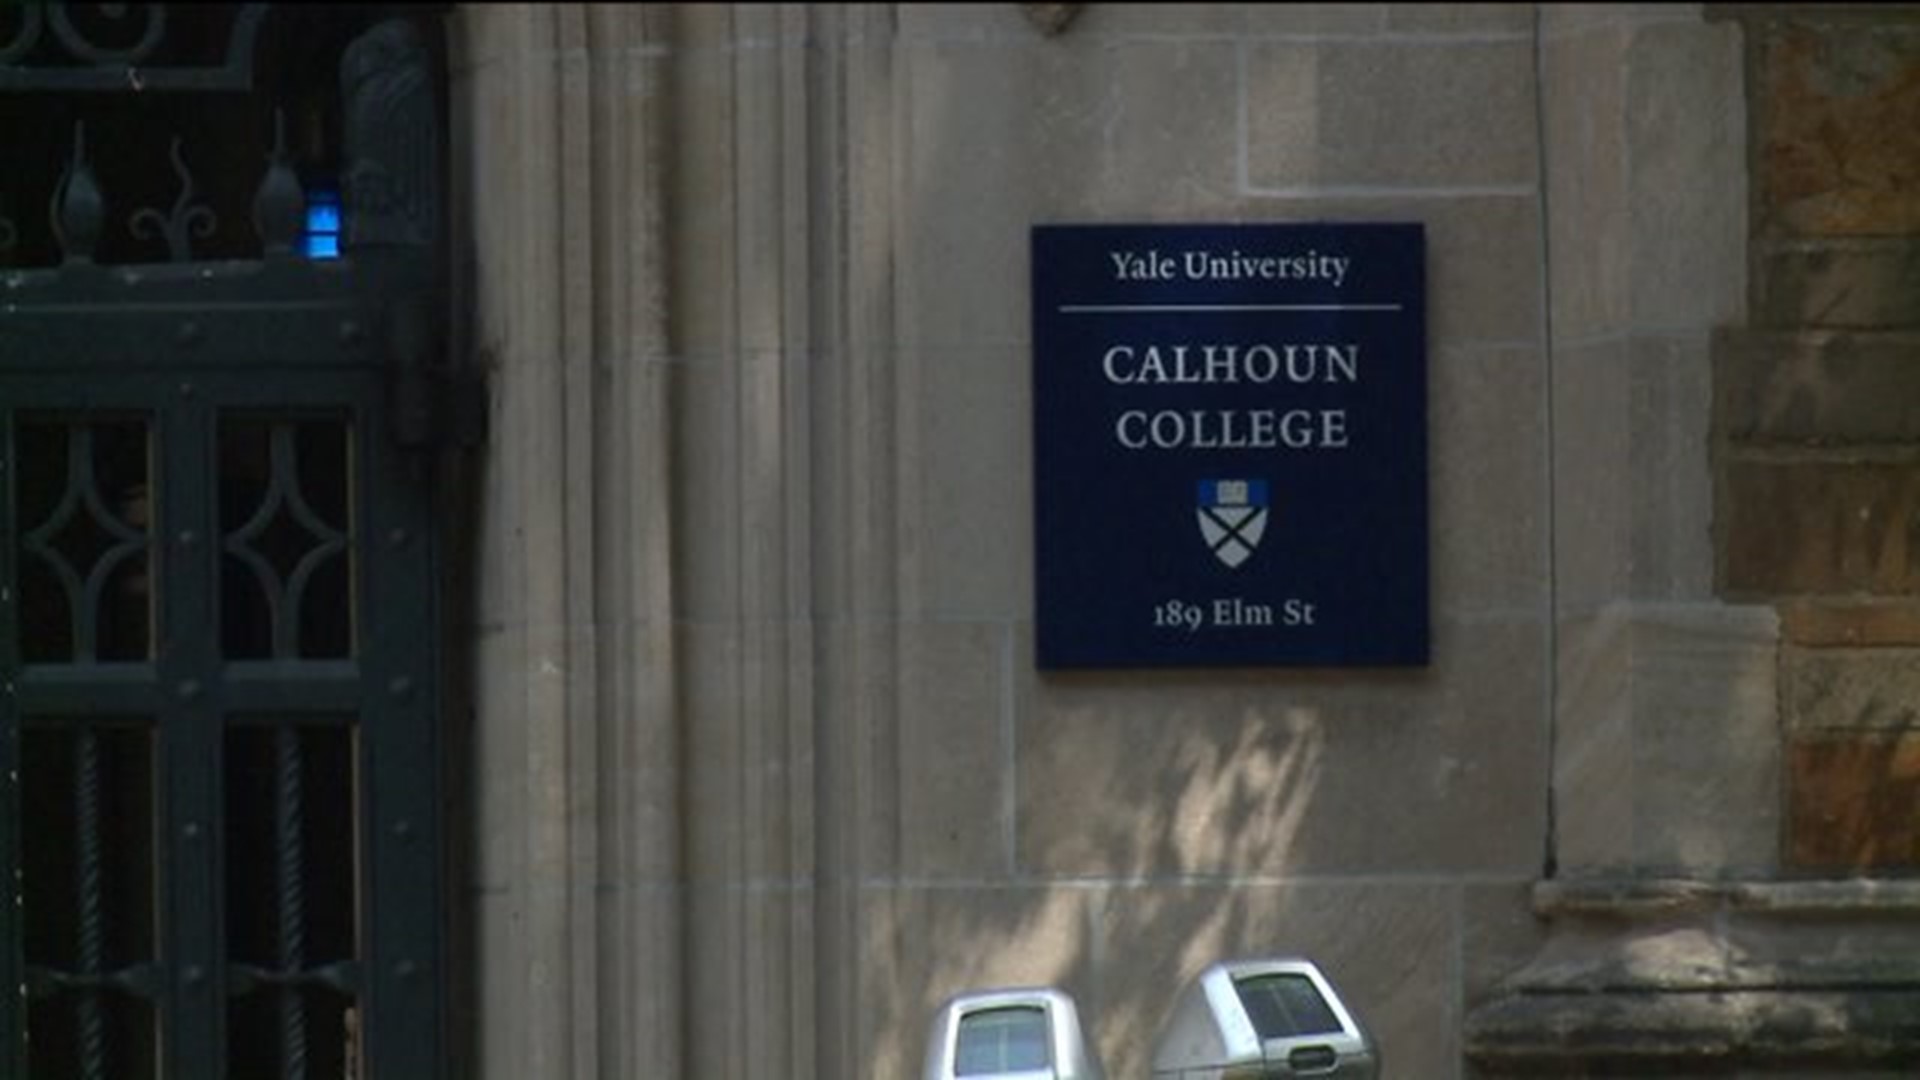 Yale University officials bring students in on discussion about renaming Calhoun College